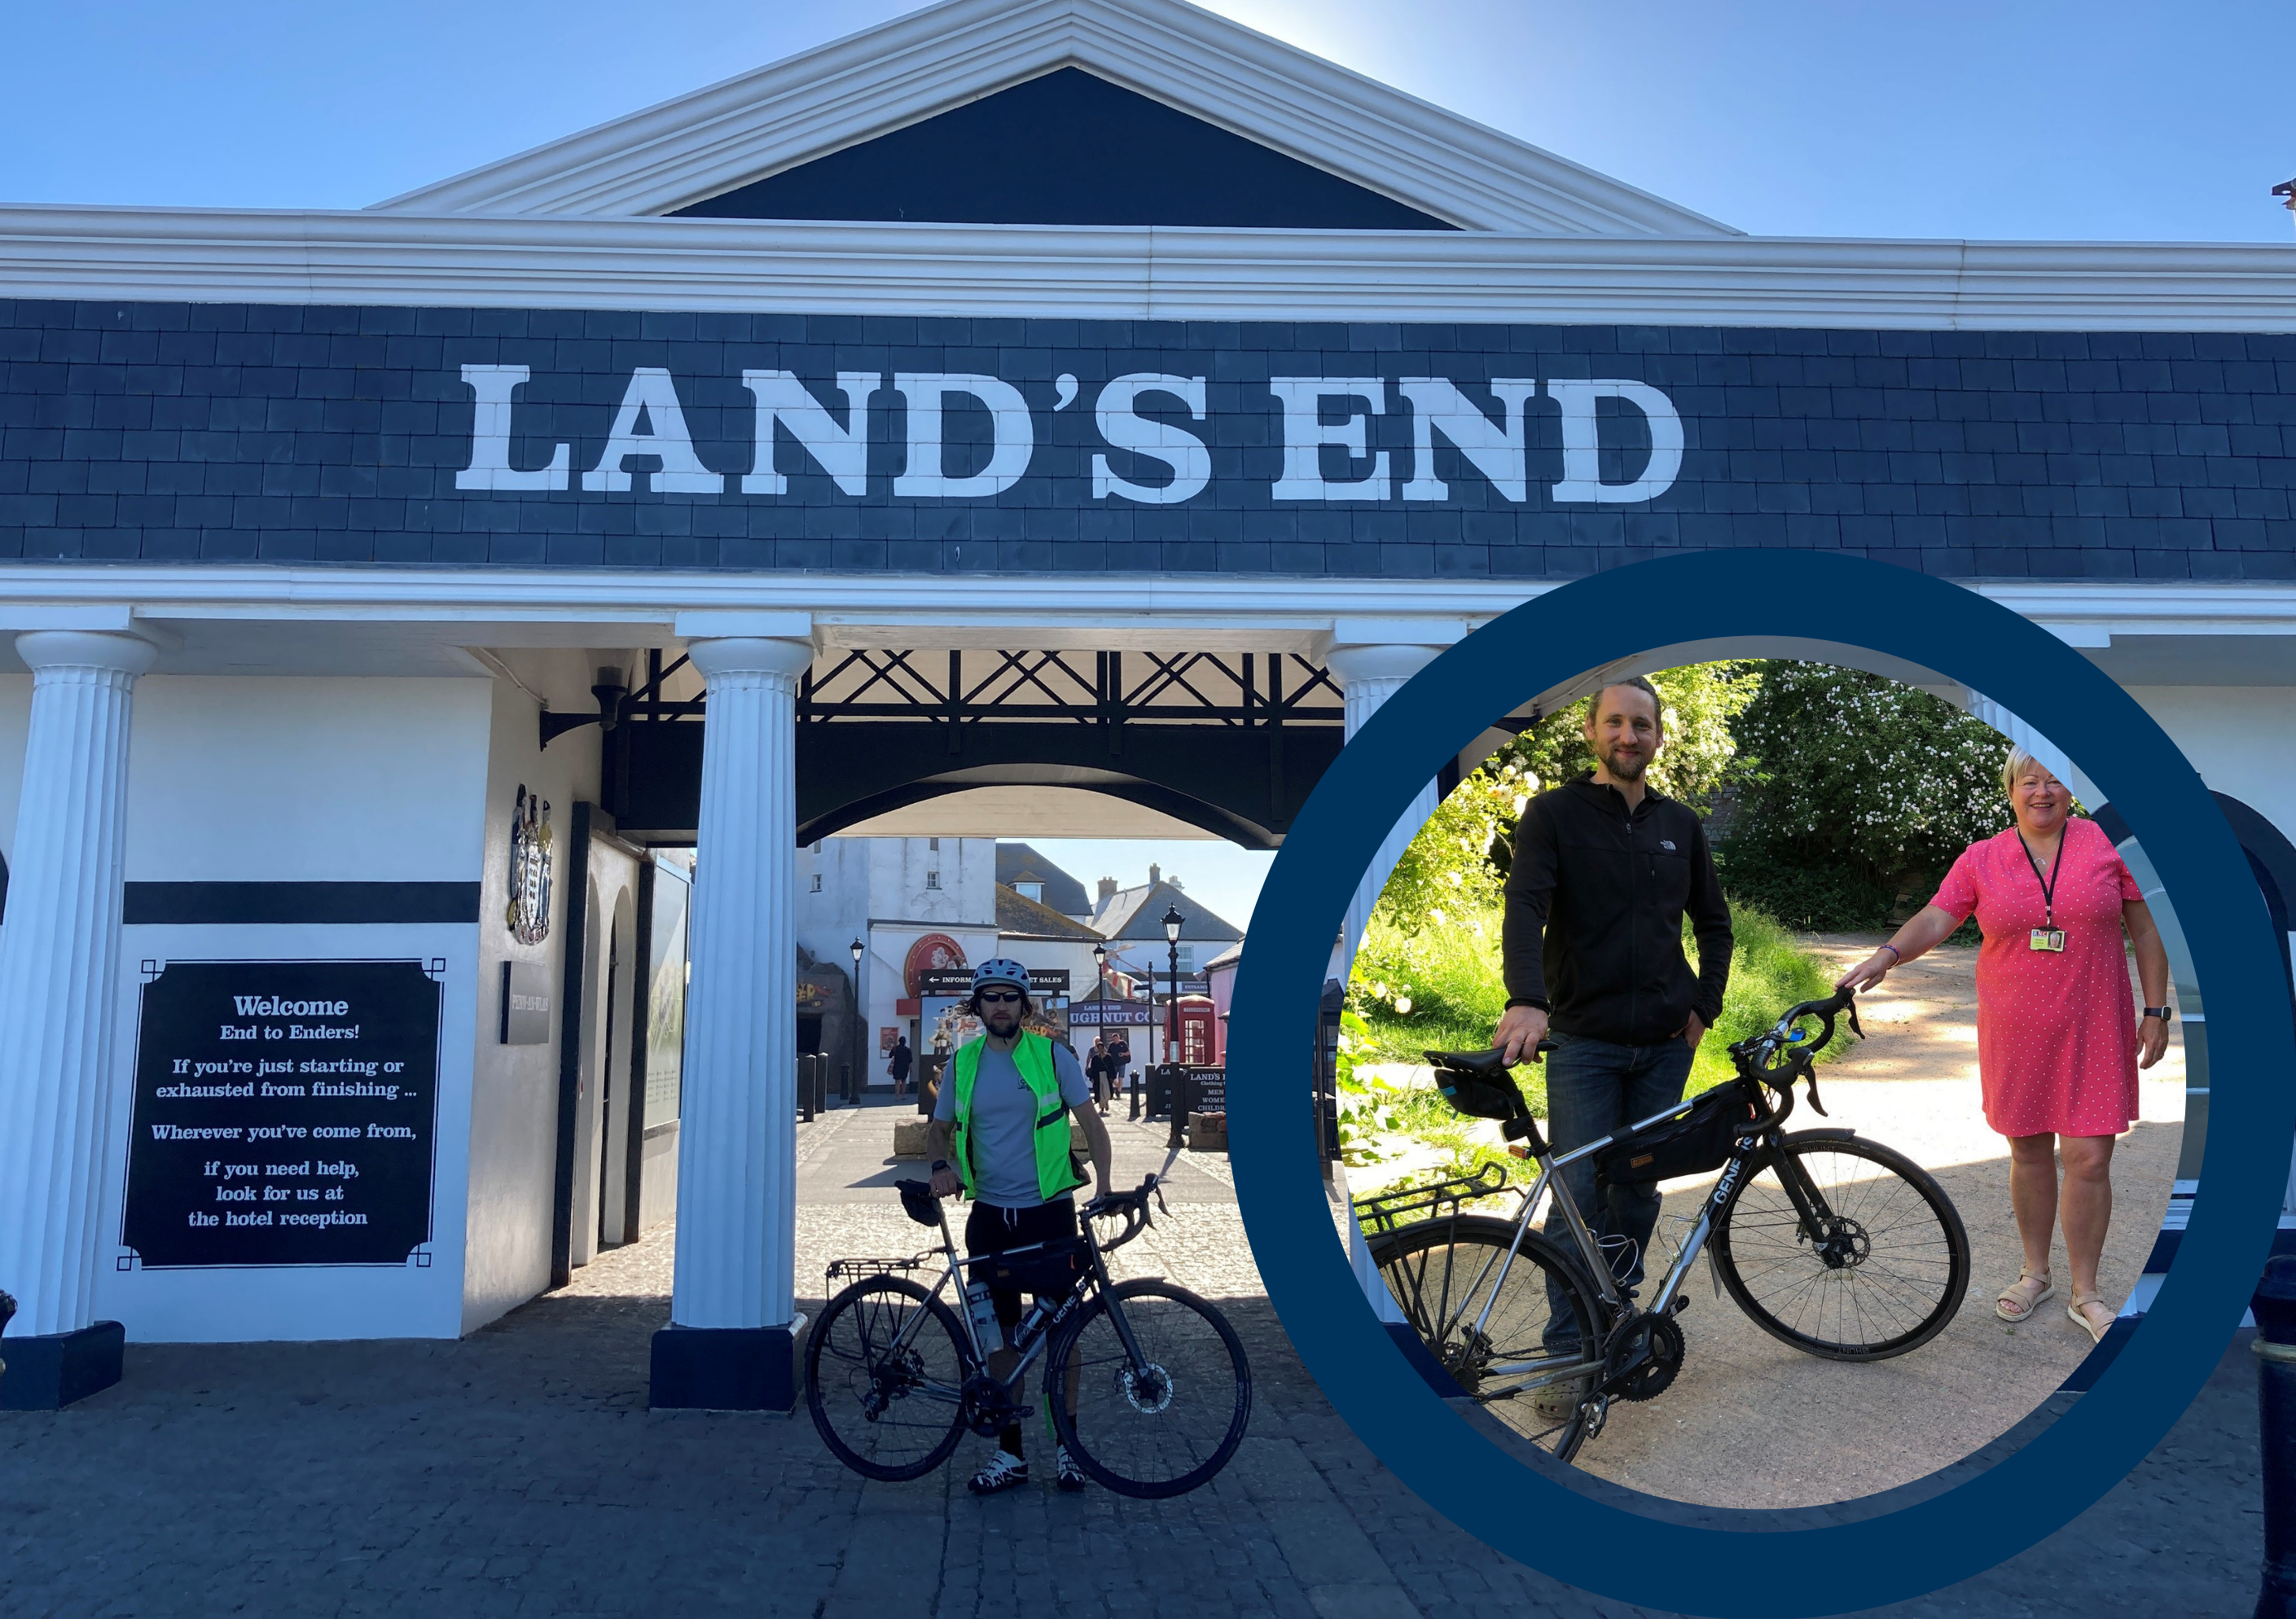 FEATURED | Andrew Davis is cycling from Lands End to John O’Groats to raise money for The Royal National College for the Blind